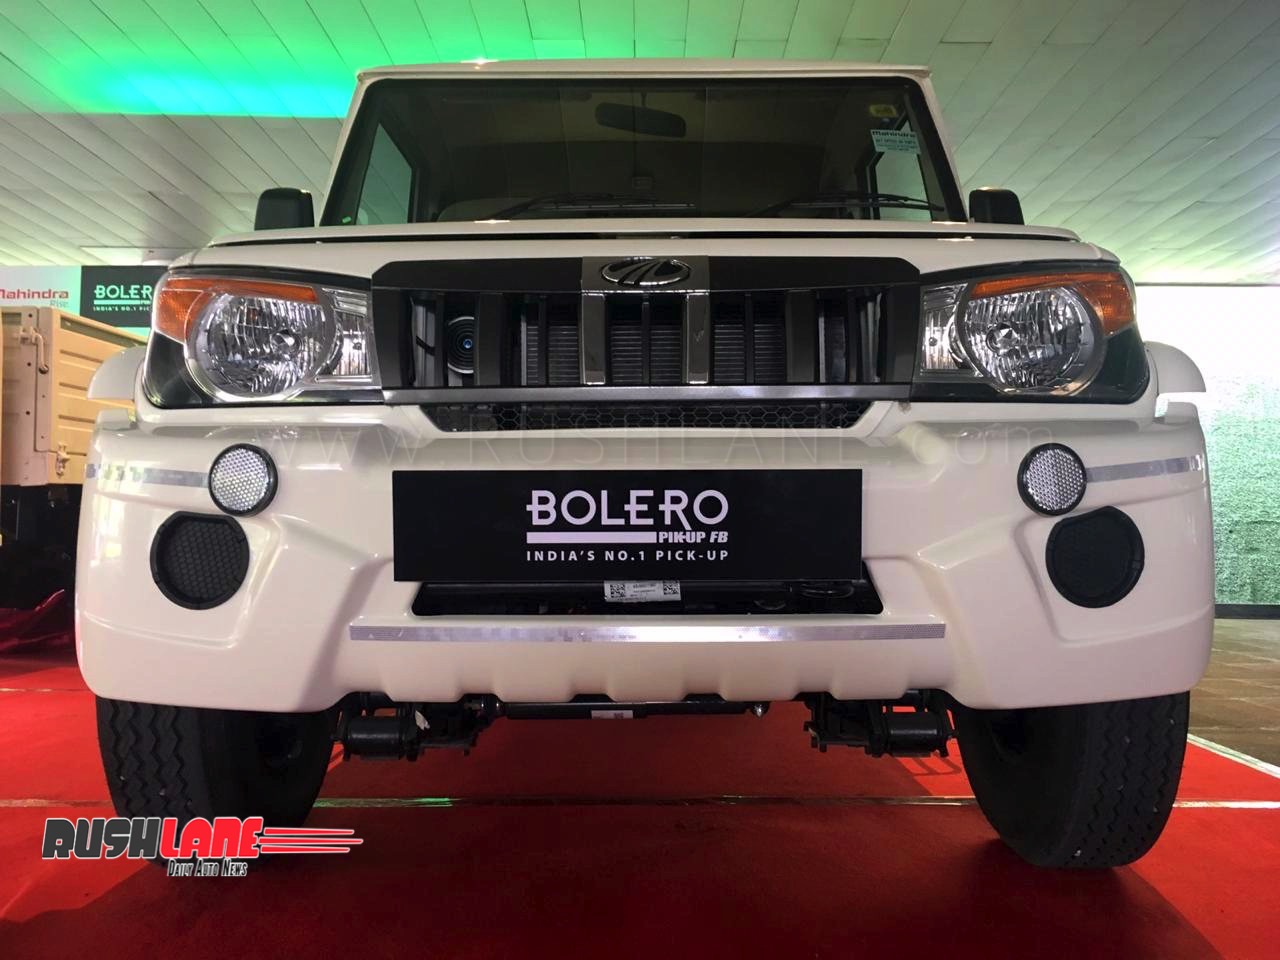 2018 Mahindra Bolero Pik Up Launched In India Offers Rs 4